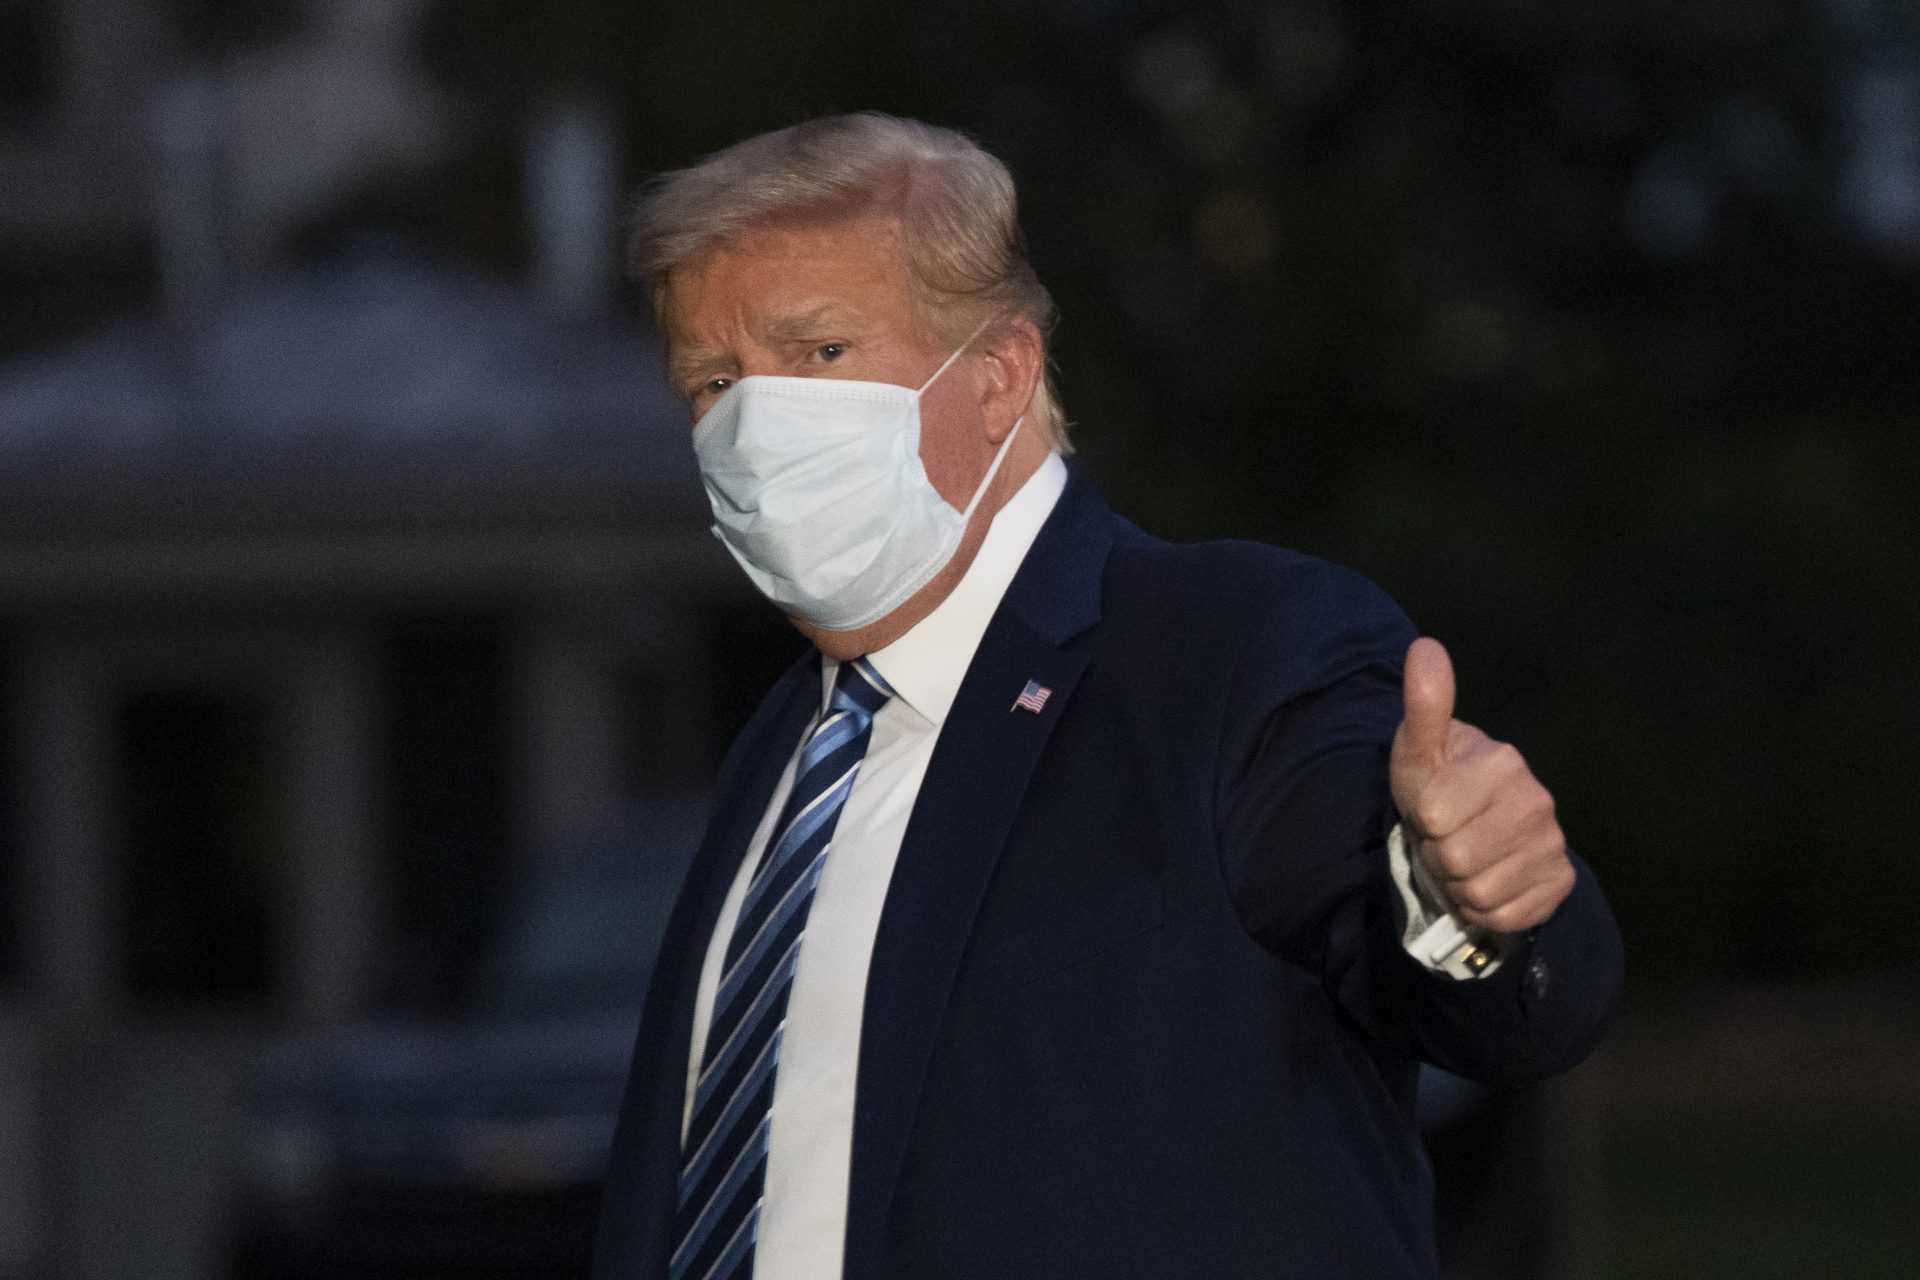 President Donald Trump gives thumbs up as he returns to the White House Monday, Oct. 5, 2020, in Washington, after leaving Walter Reed National Military Medical Center, in Bethesda, Md. Trump announced he tested positive for COVID-19 on Oct. 2.